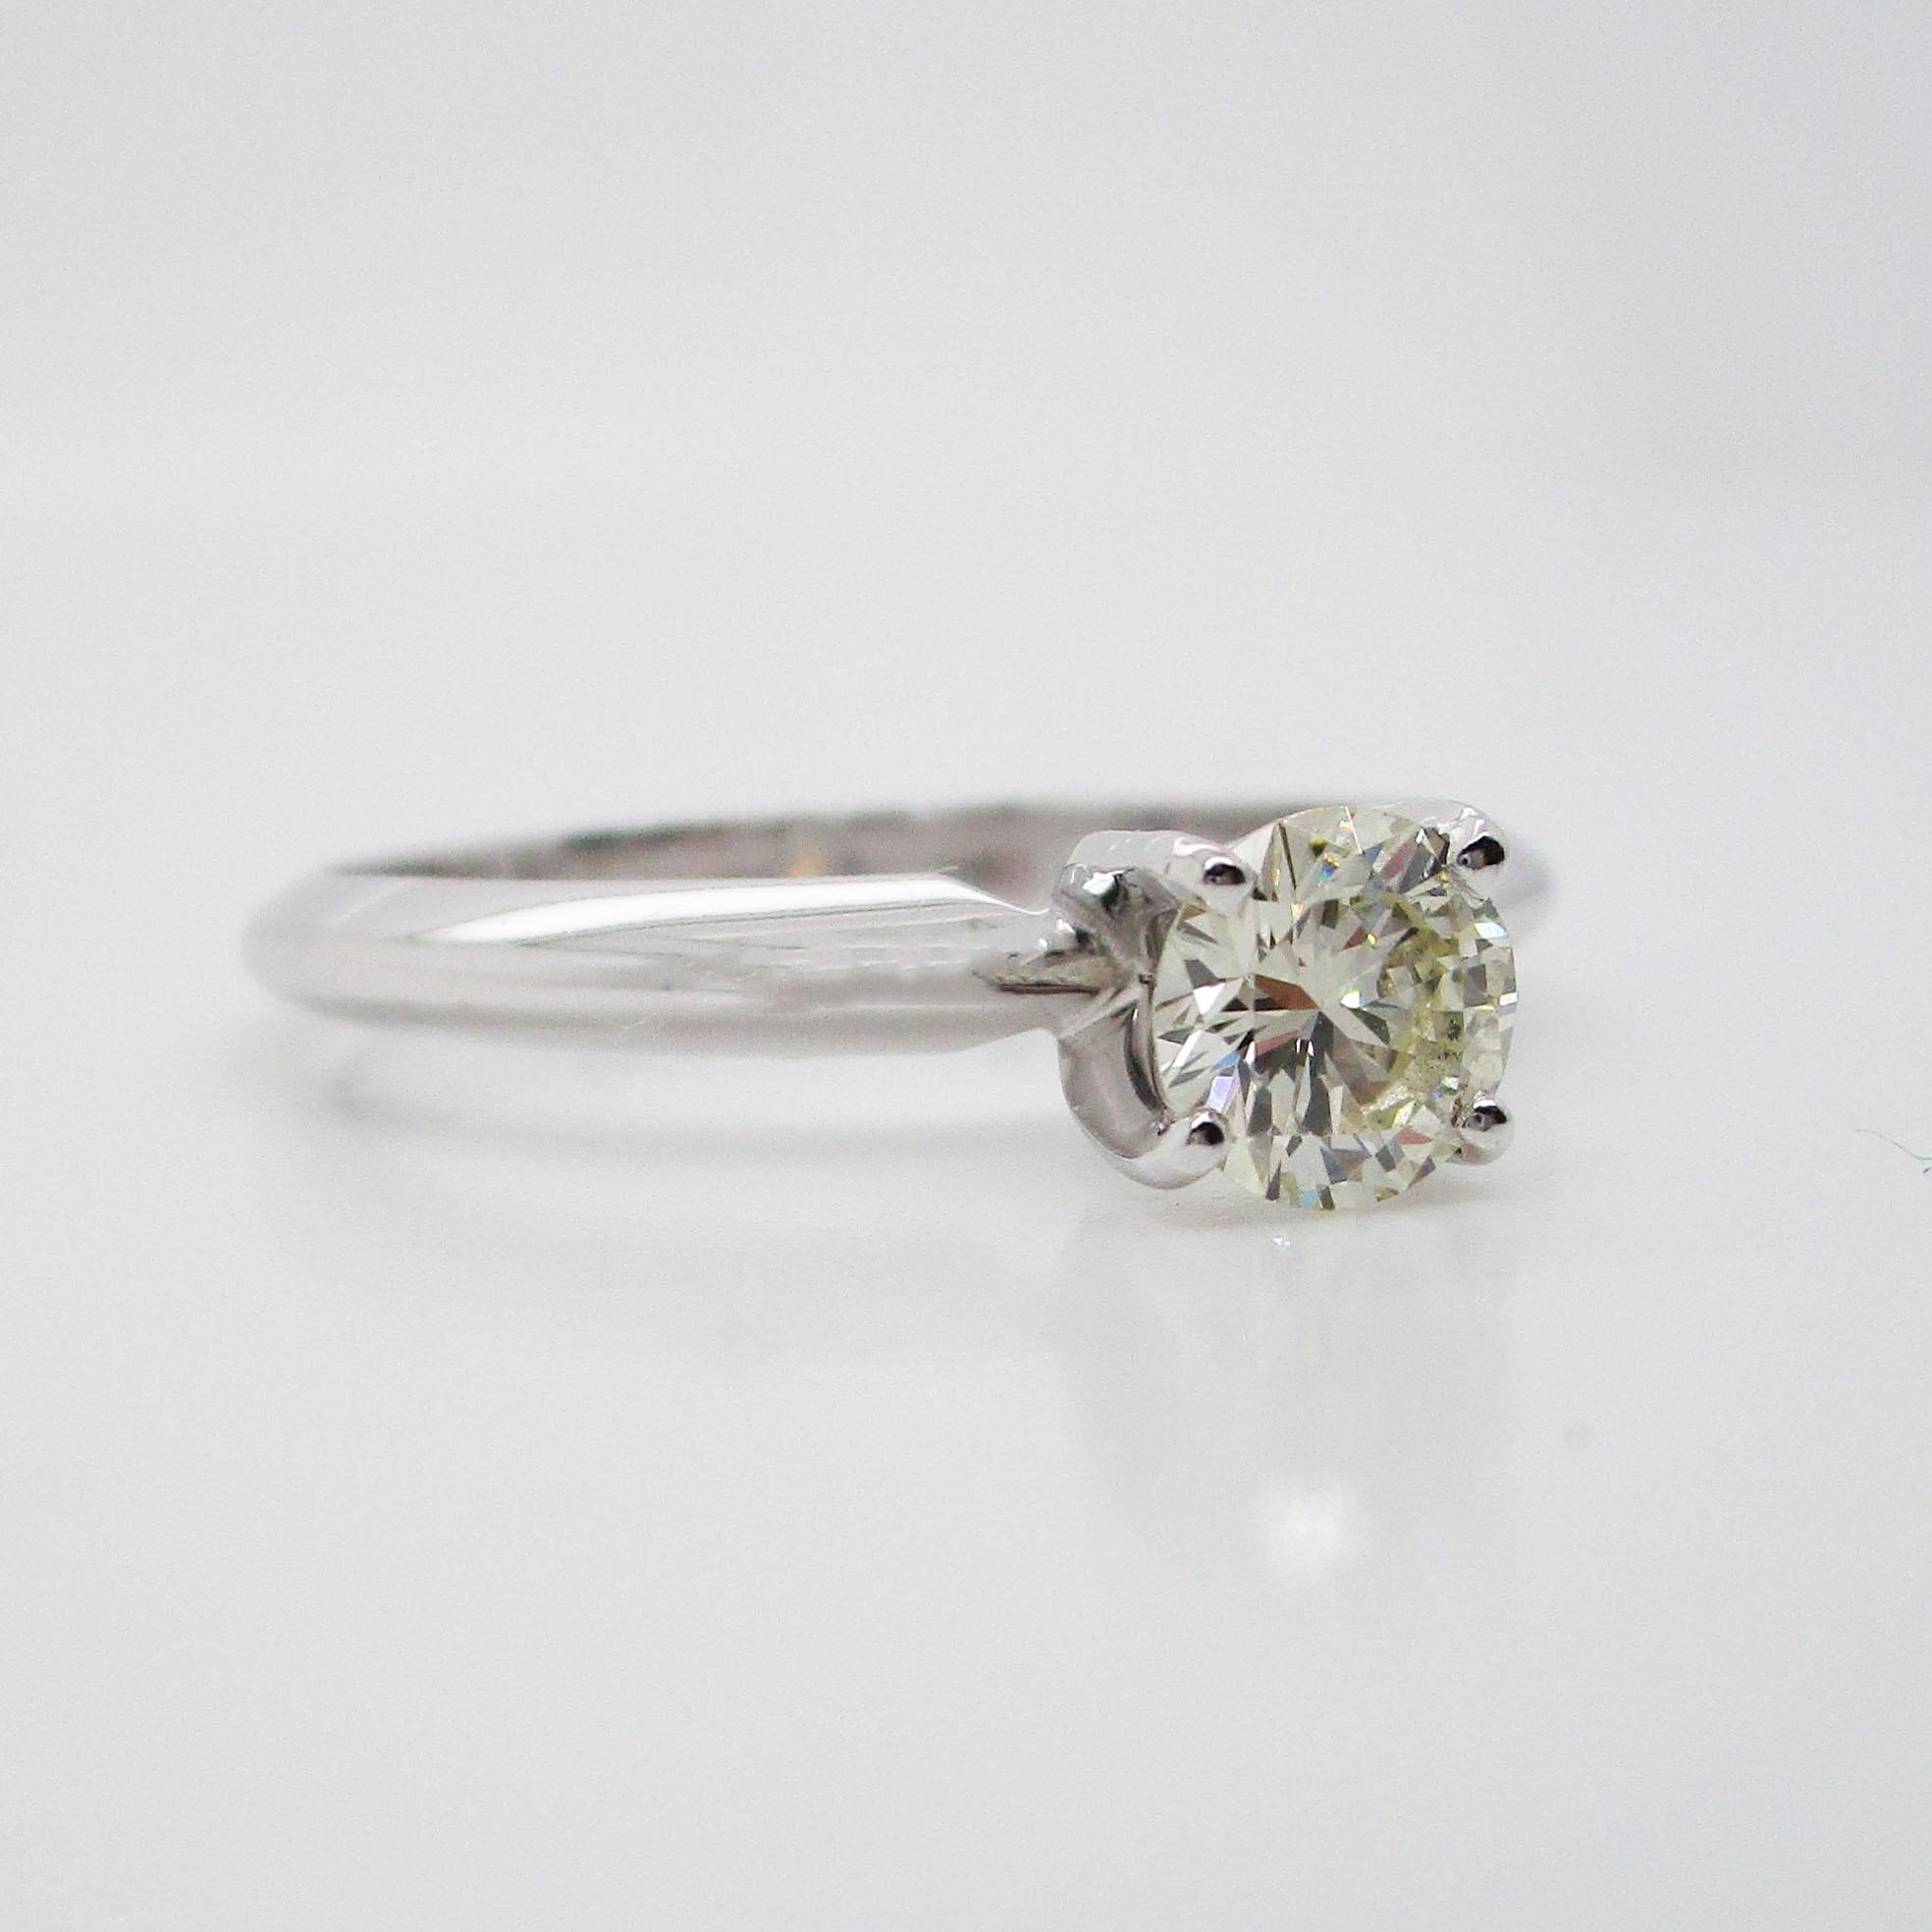 Diamond Solitaire 18K White Gold Engagement Ring In Excellent Condition For Sale In Lexington, KY